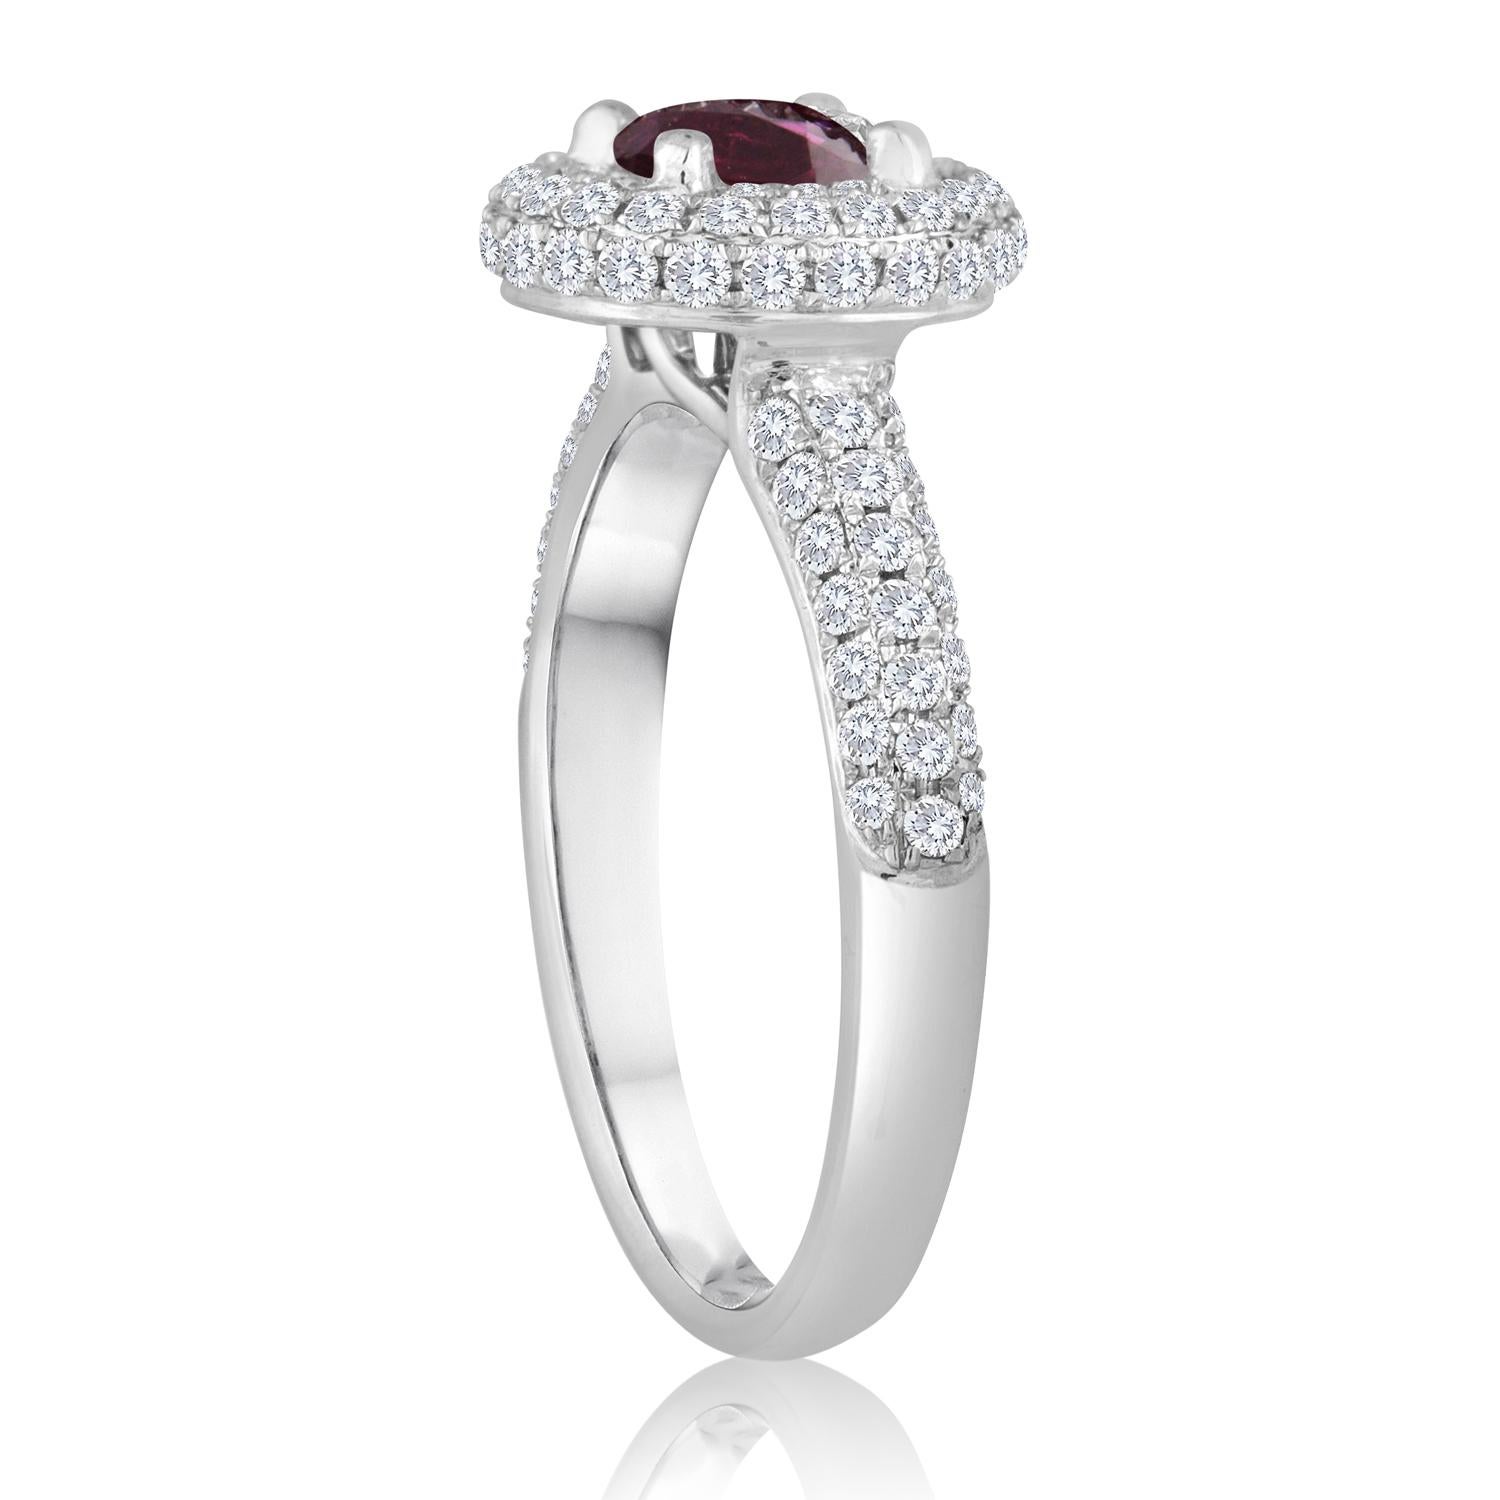 Beautiful Round Halo Pave Ring
The ring is 18K White Gold
The Center Stone is a Round Ruby 0.89 Carats
The Ruby is AGL Certified Heated
There are 0.81 Carats in Diamonds F/G VS/SI
The ring is a size 6.75, sizable 1 size up or 1 size down, max.
The